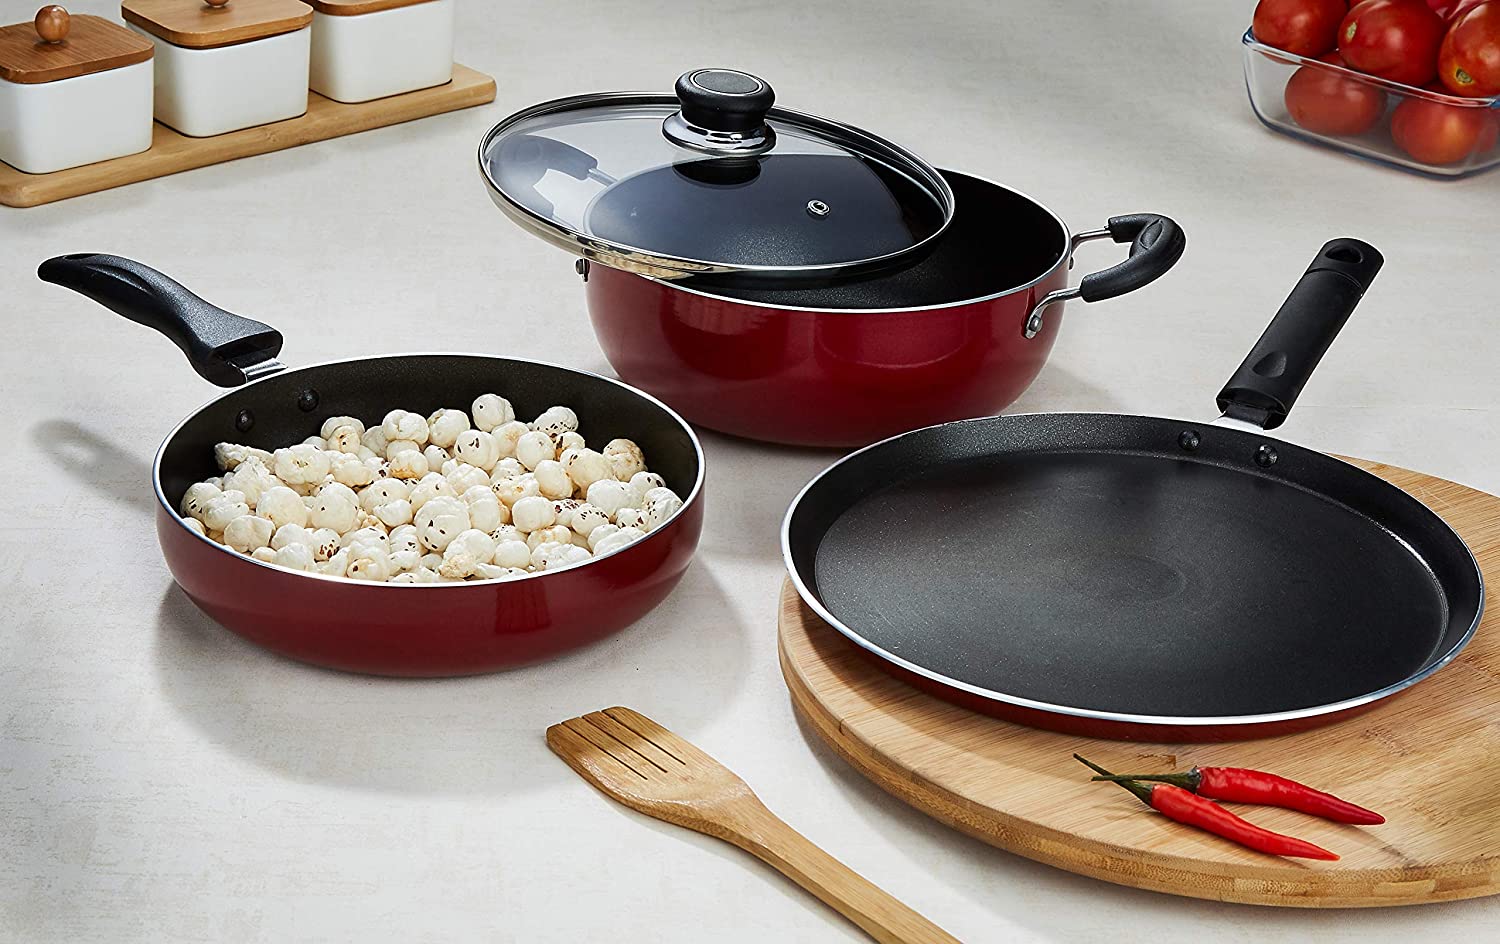 What’s the Difference Between Nonstick and Stainless Steel Cookware